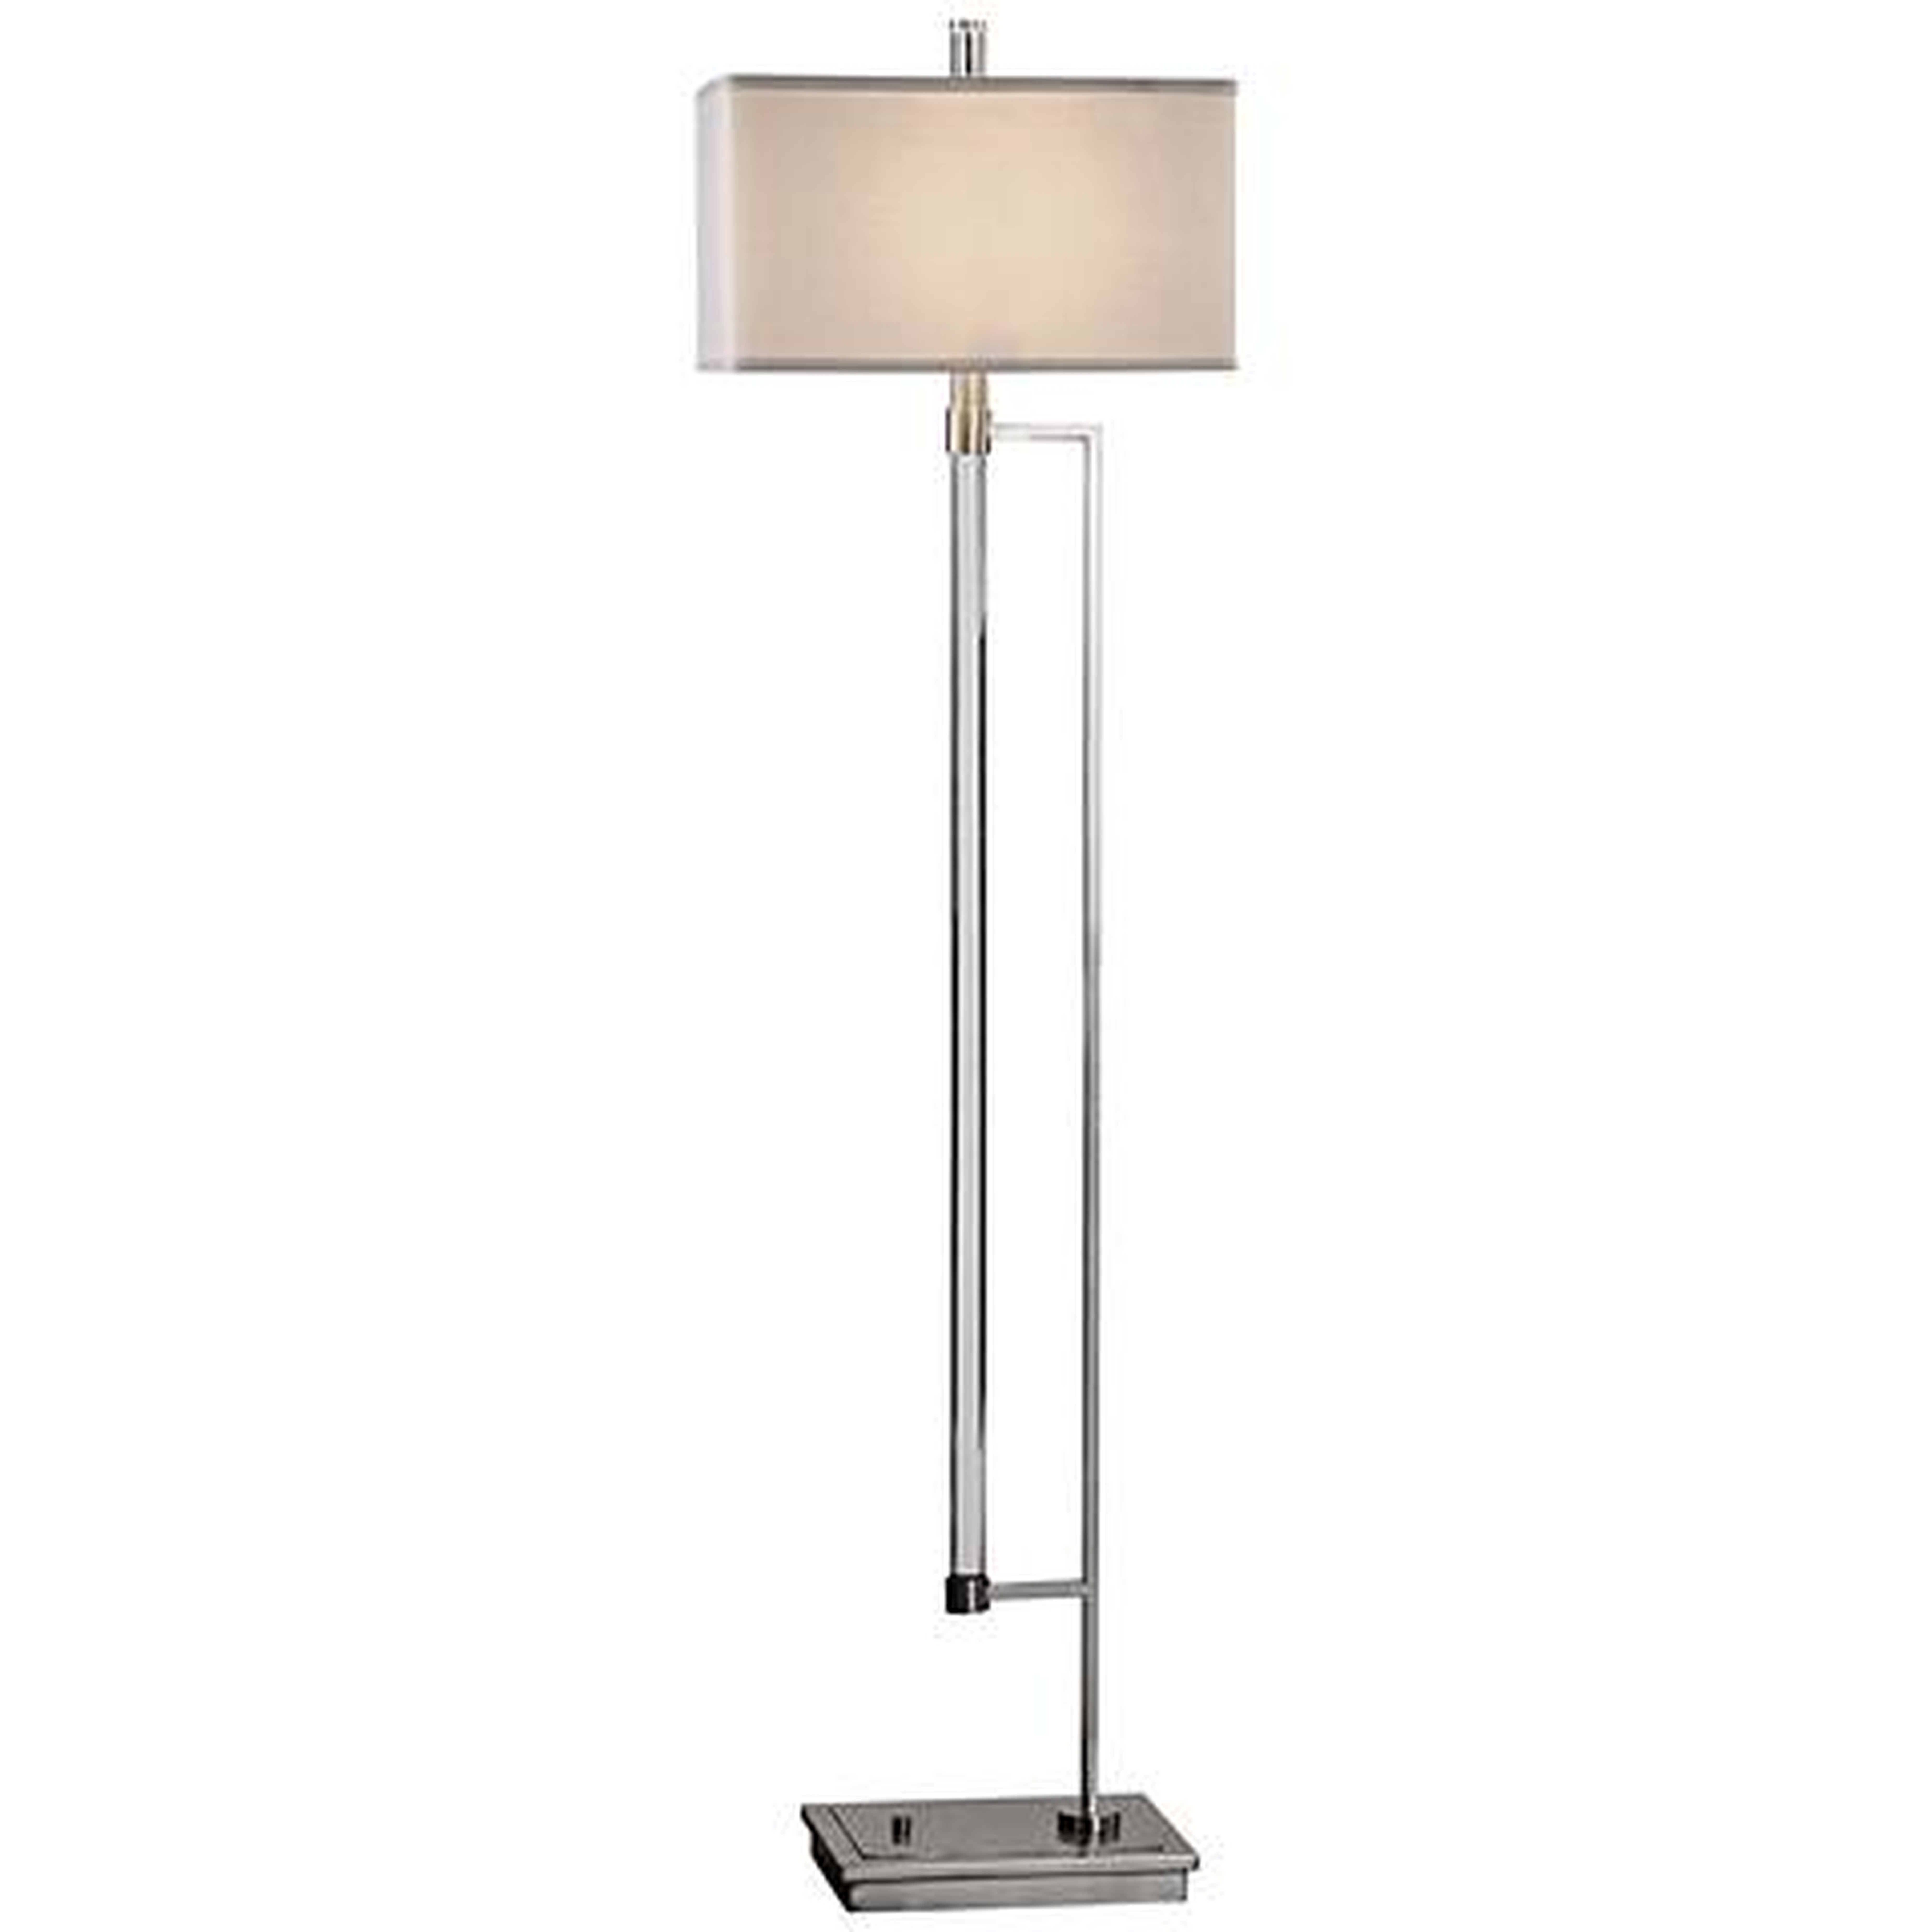 Uttermost Mannan Acrylic Rod and Polished Nickel Floor Lamp clear - Lamps Plus